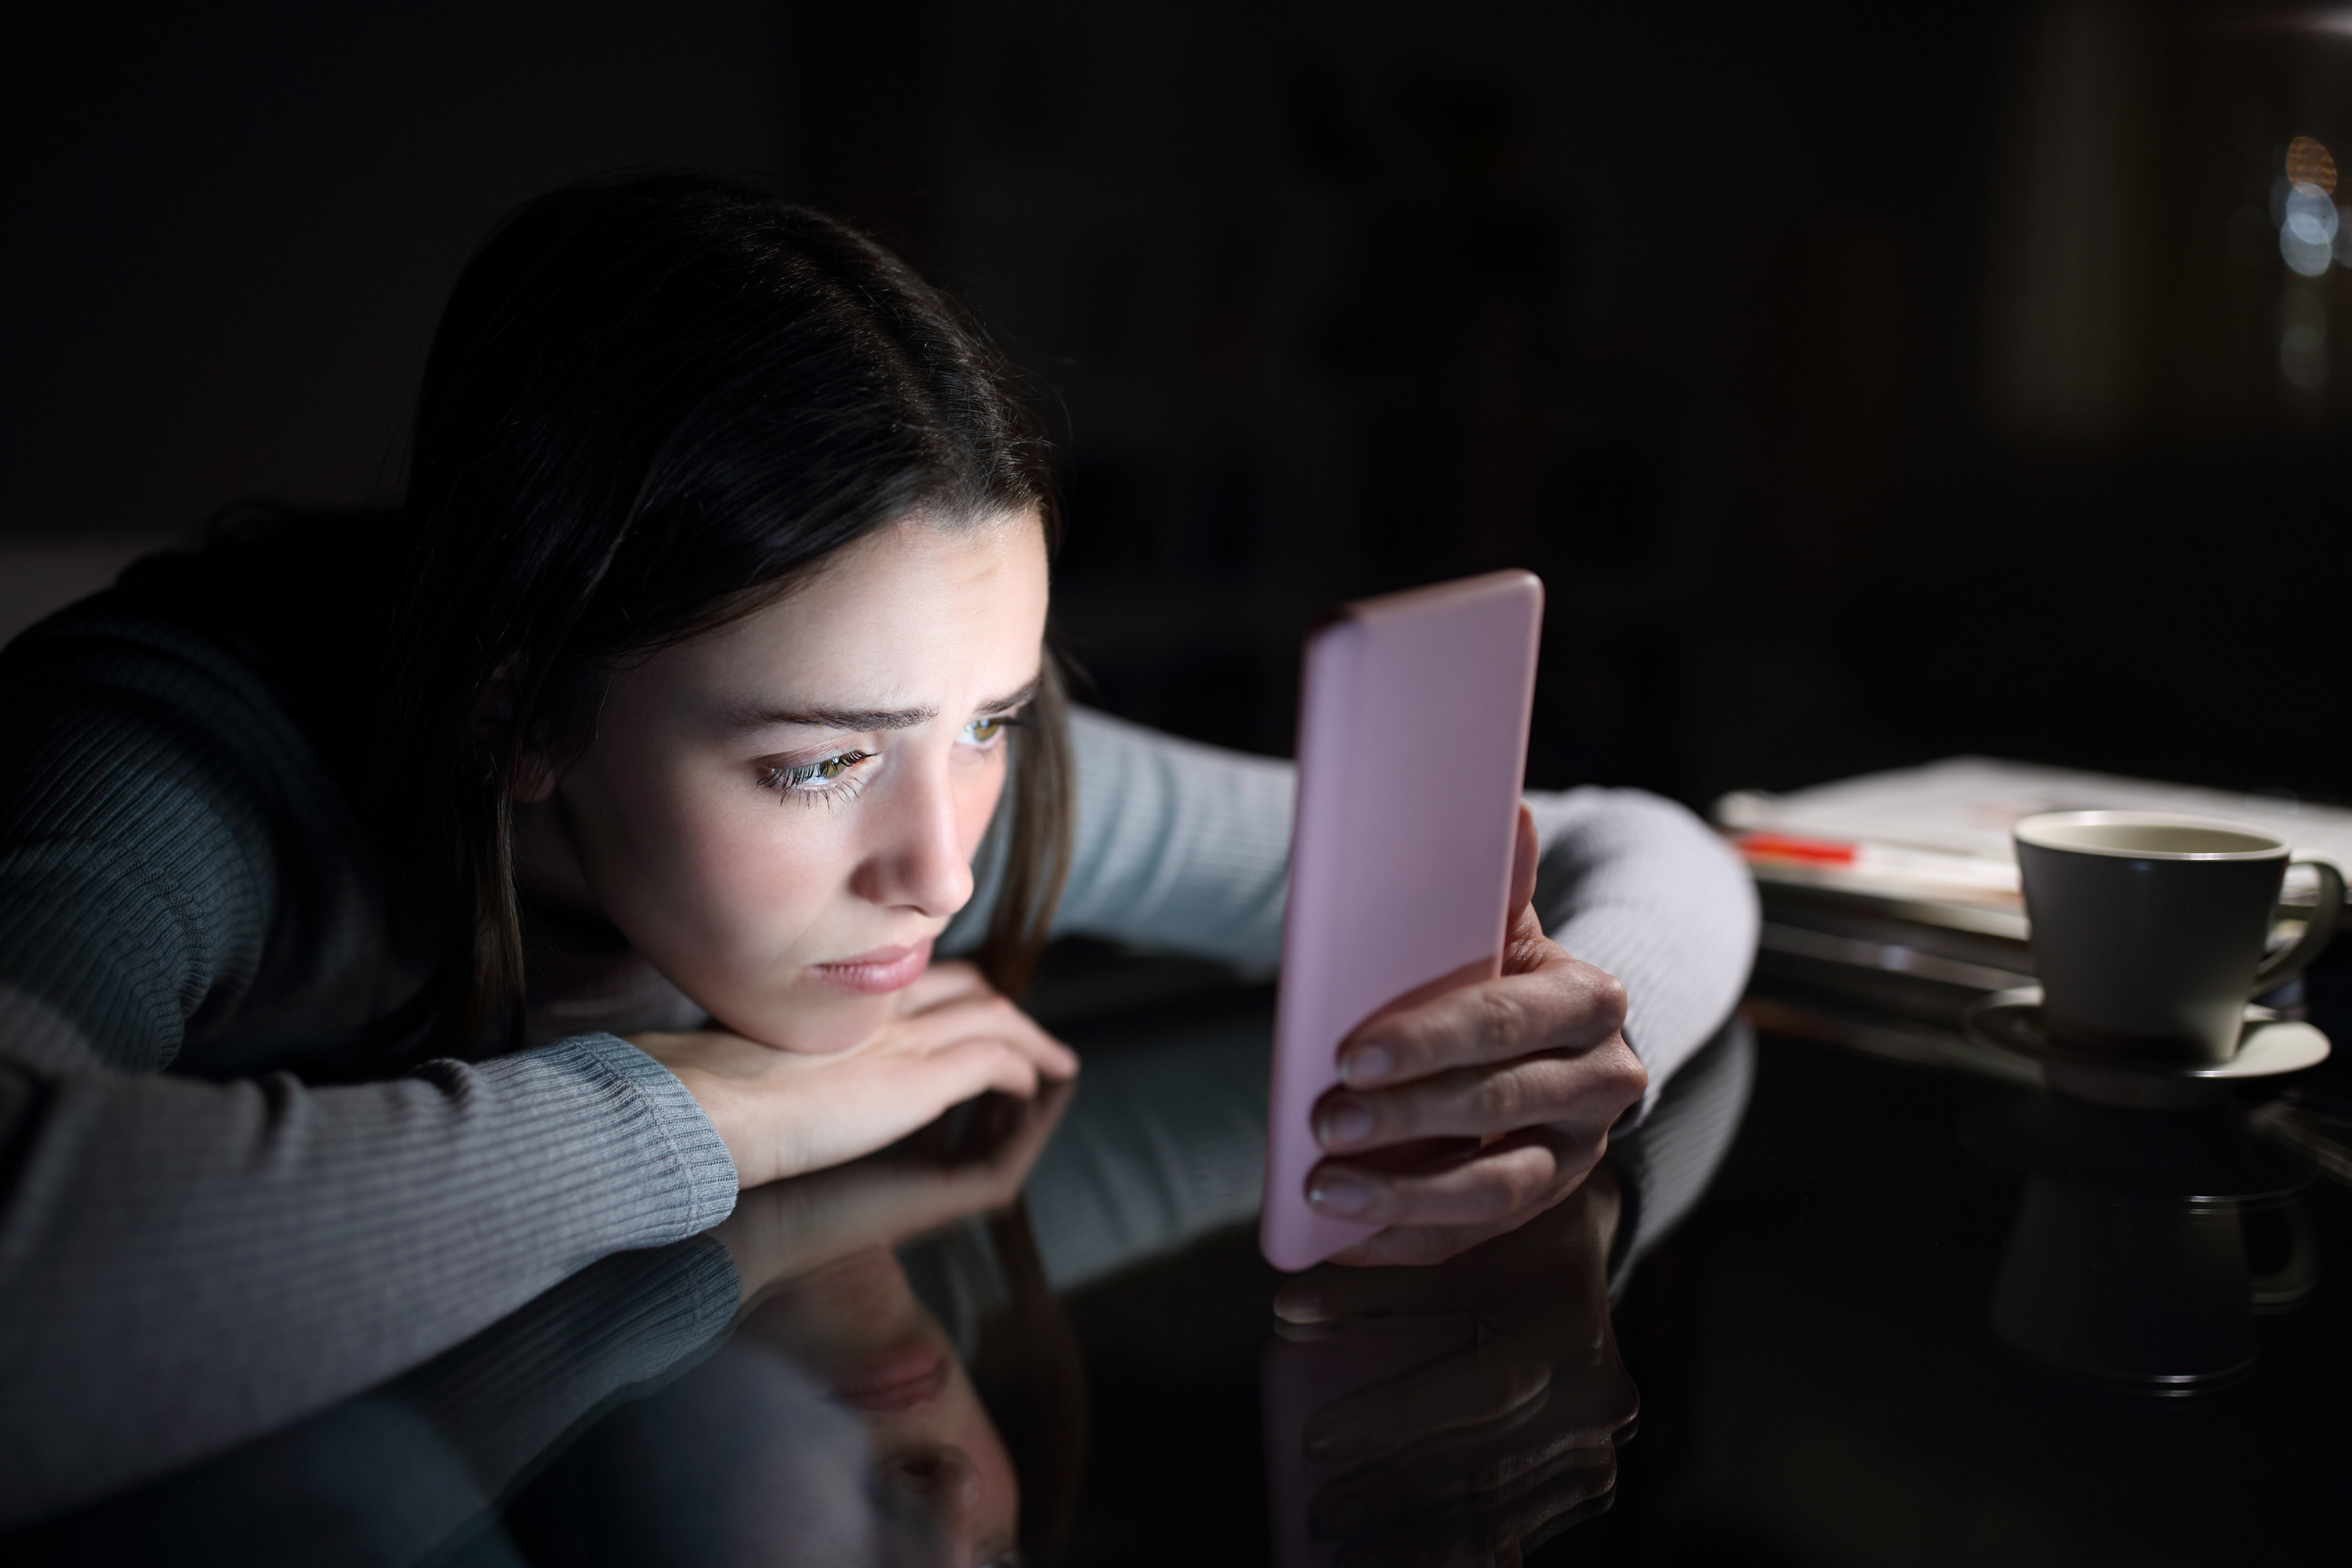 A girl looking sad at her phone in the dark